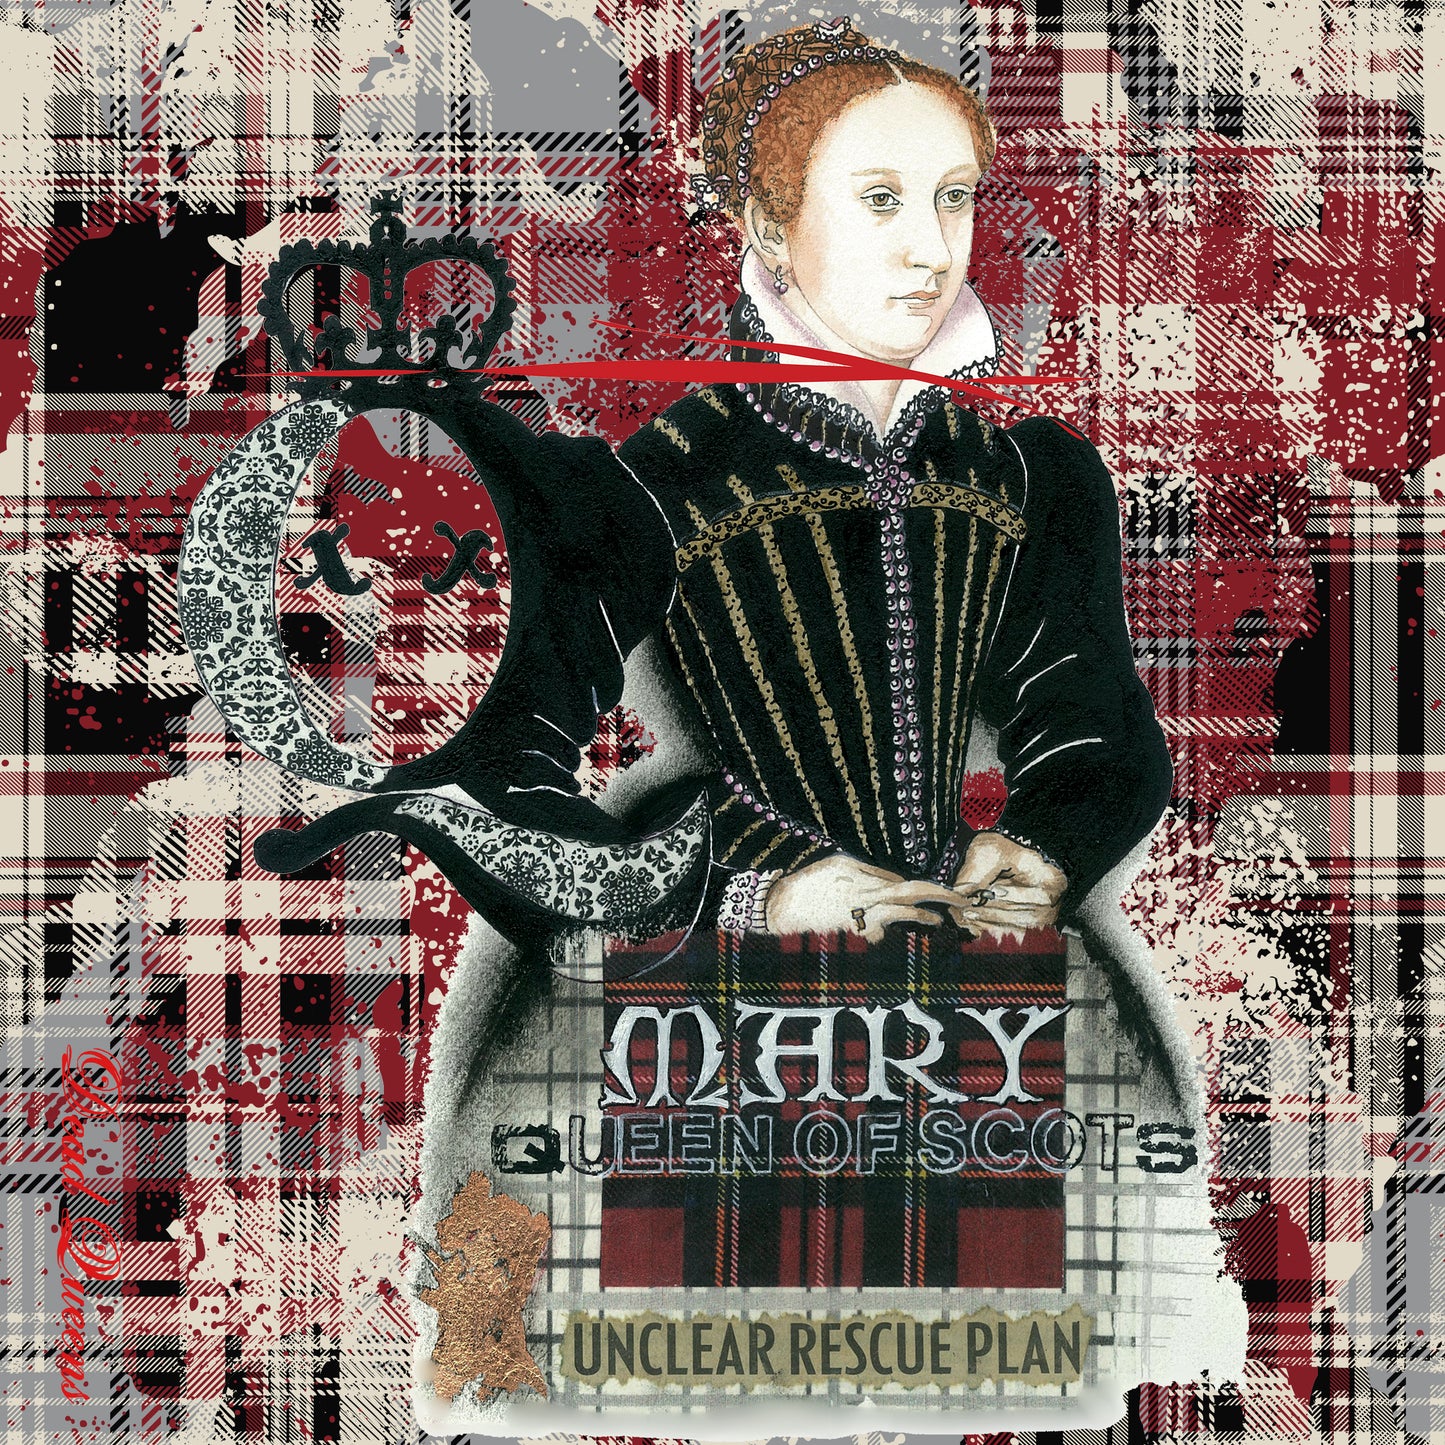 Mary Queen of Scots Plaid Square Silk Scarf Art- Dead Queens